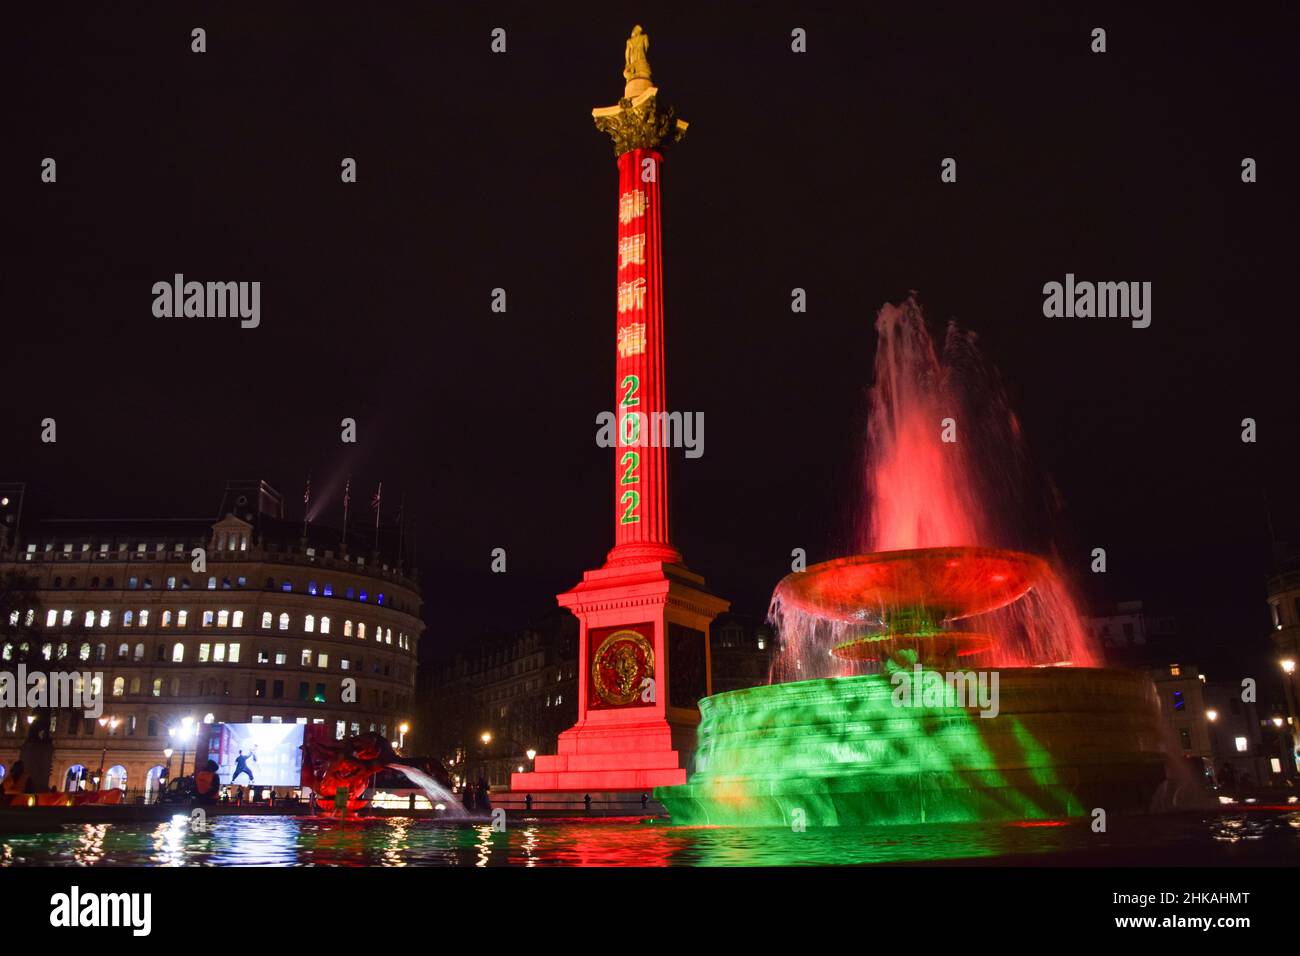 London, UK 31st January 2022. '2022' is projected onto Nelson's Column in Trafalgar Square in celebration of Chinese New Year. This year marks the Year of the Tiger. Stock Photo